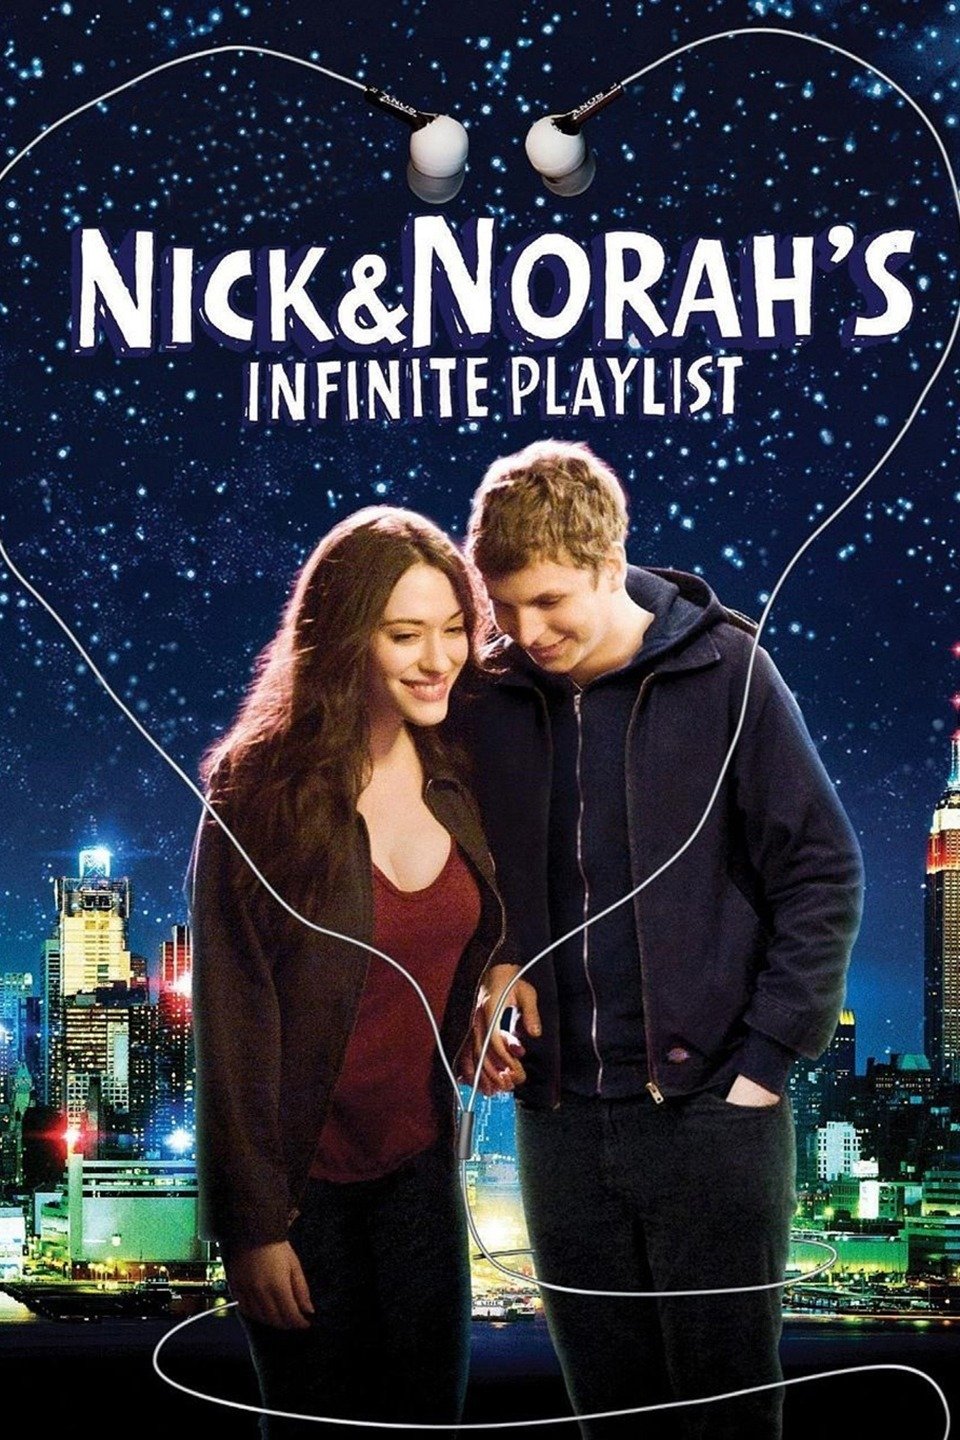 Nick and Norah's Infinite Playlist - Rotten Tomatoes